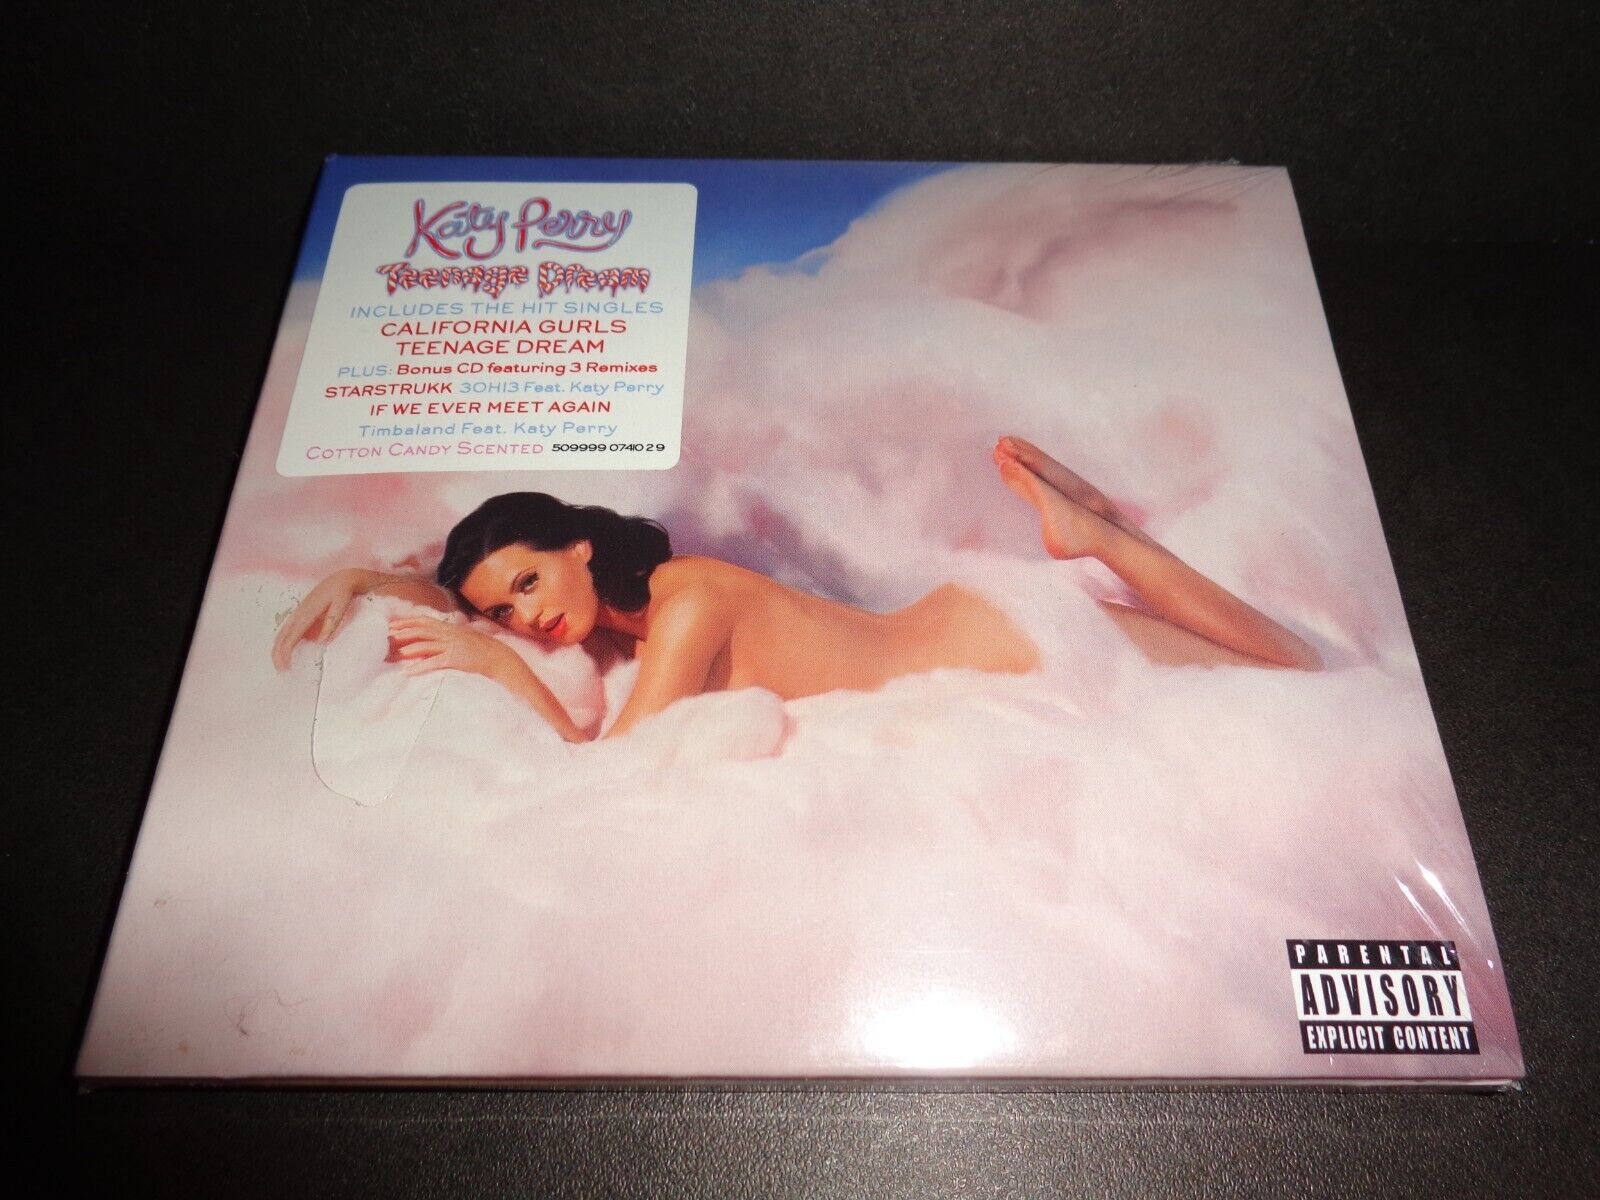 katy perry scratch and sniff album